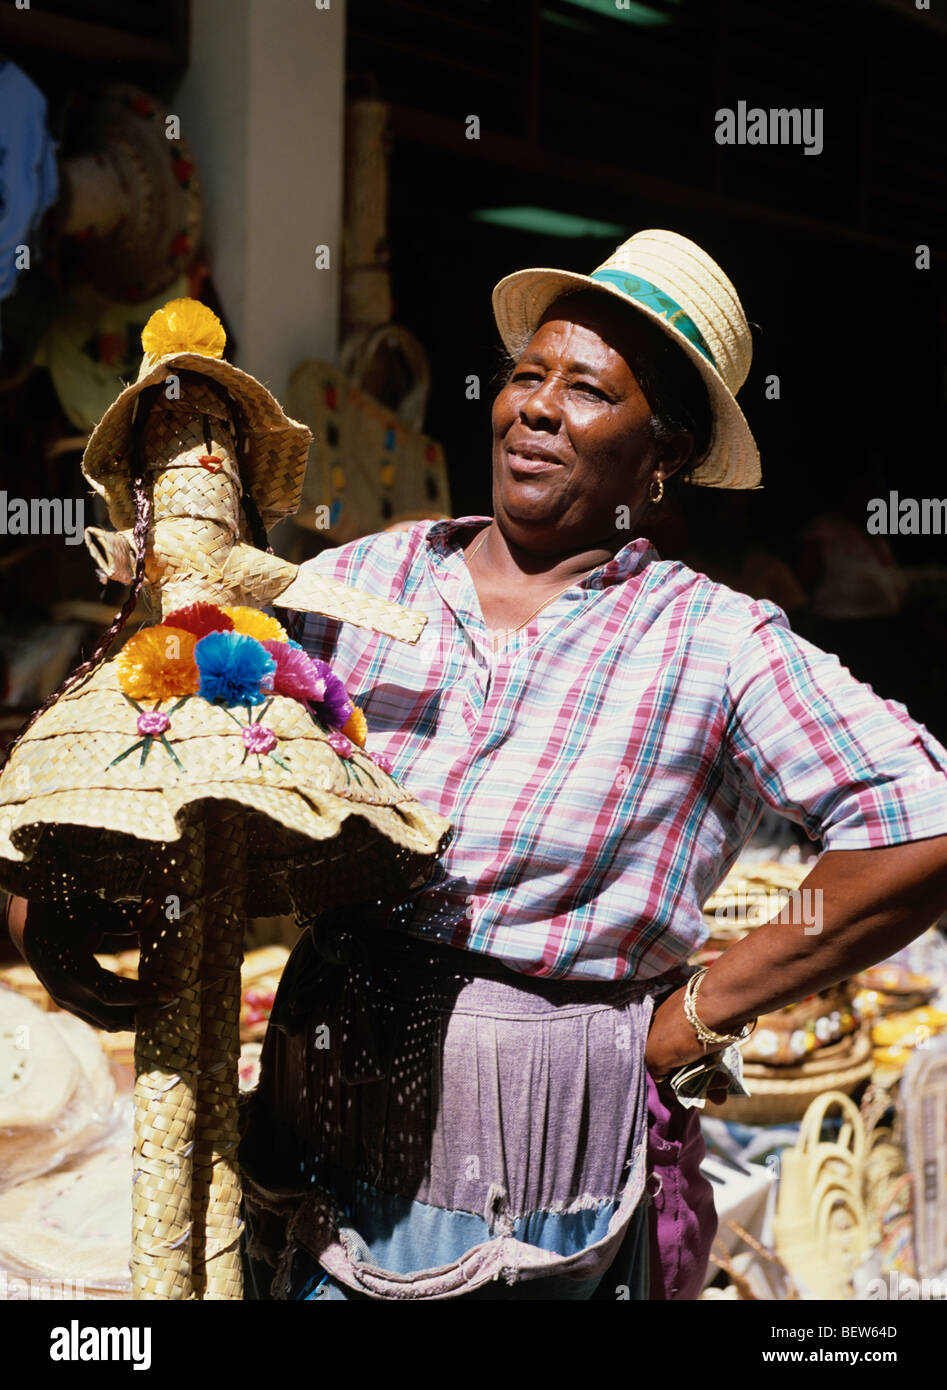 Local woman selling tourist souvenirs at the Straw Market in Nassau, the capital of The Bahamian Islands Stock Photo